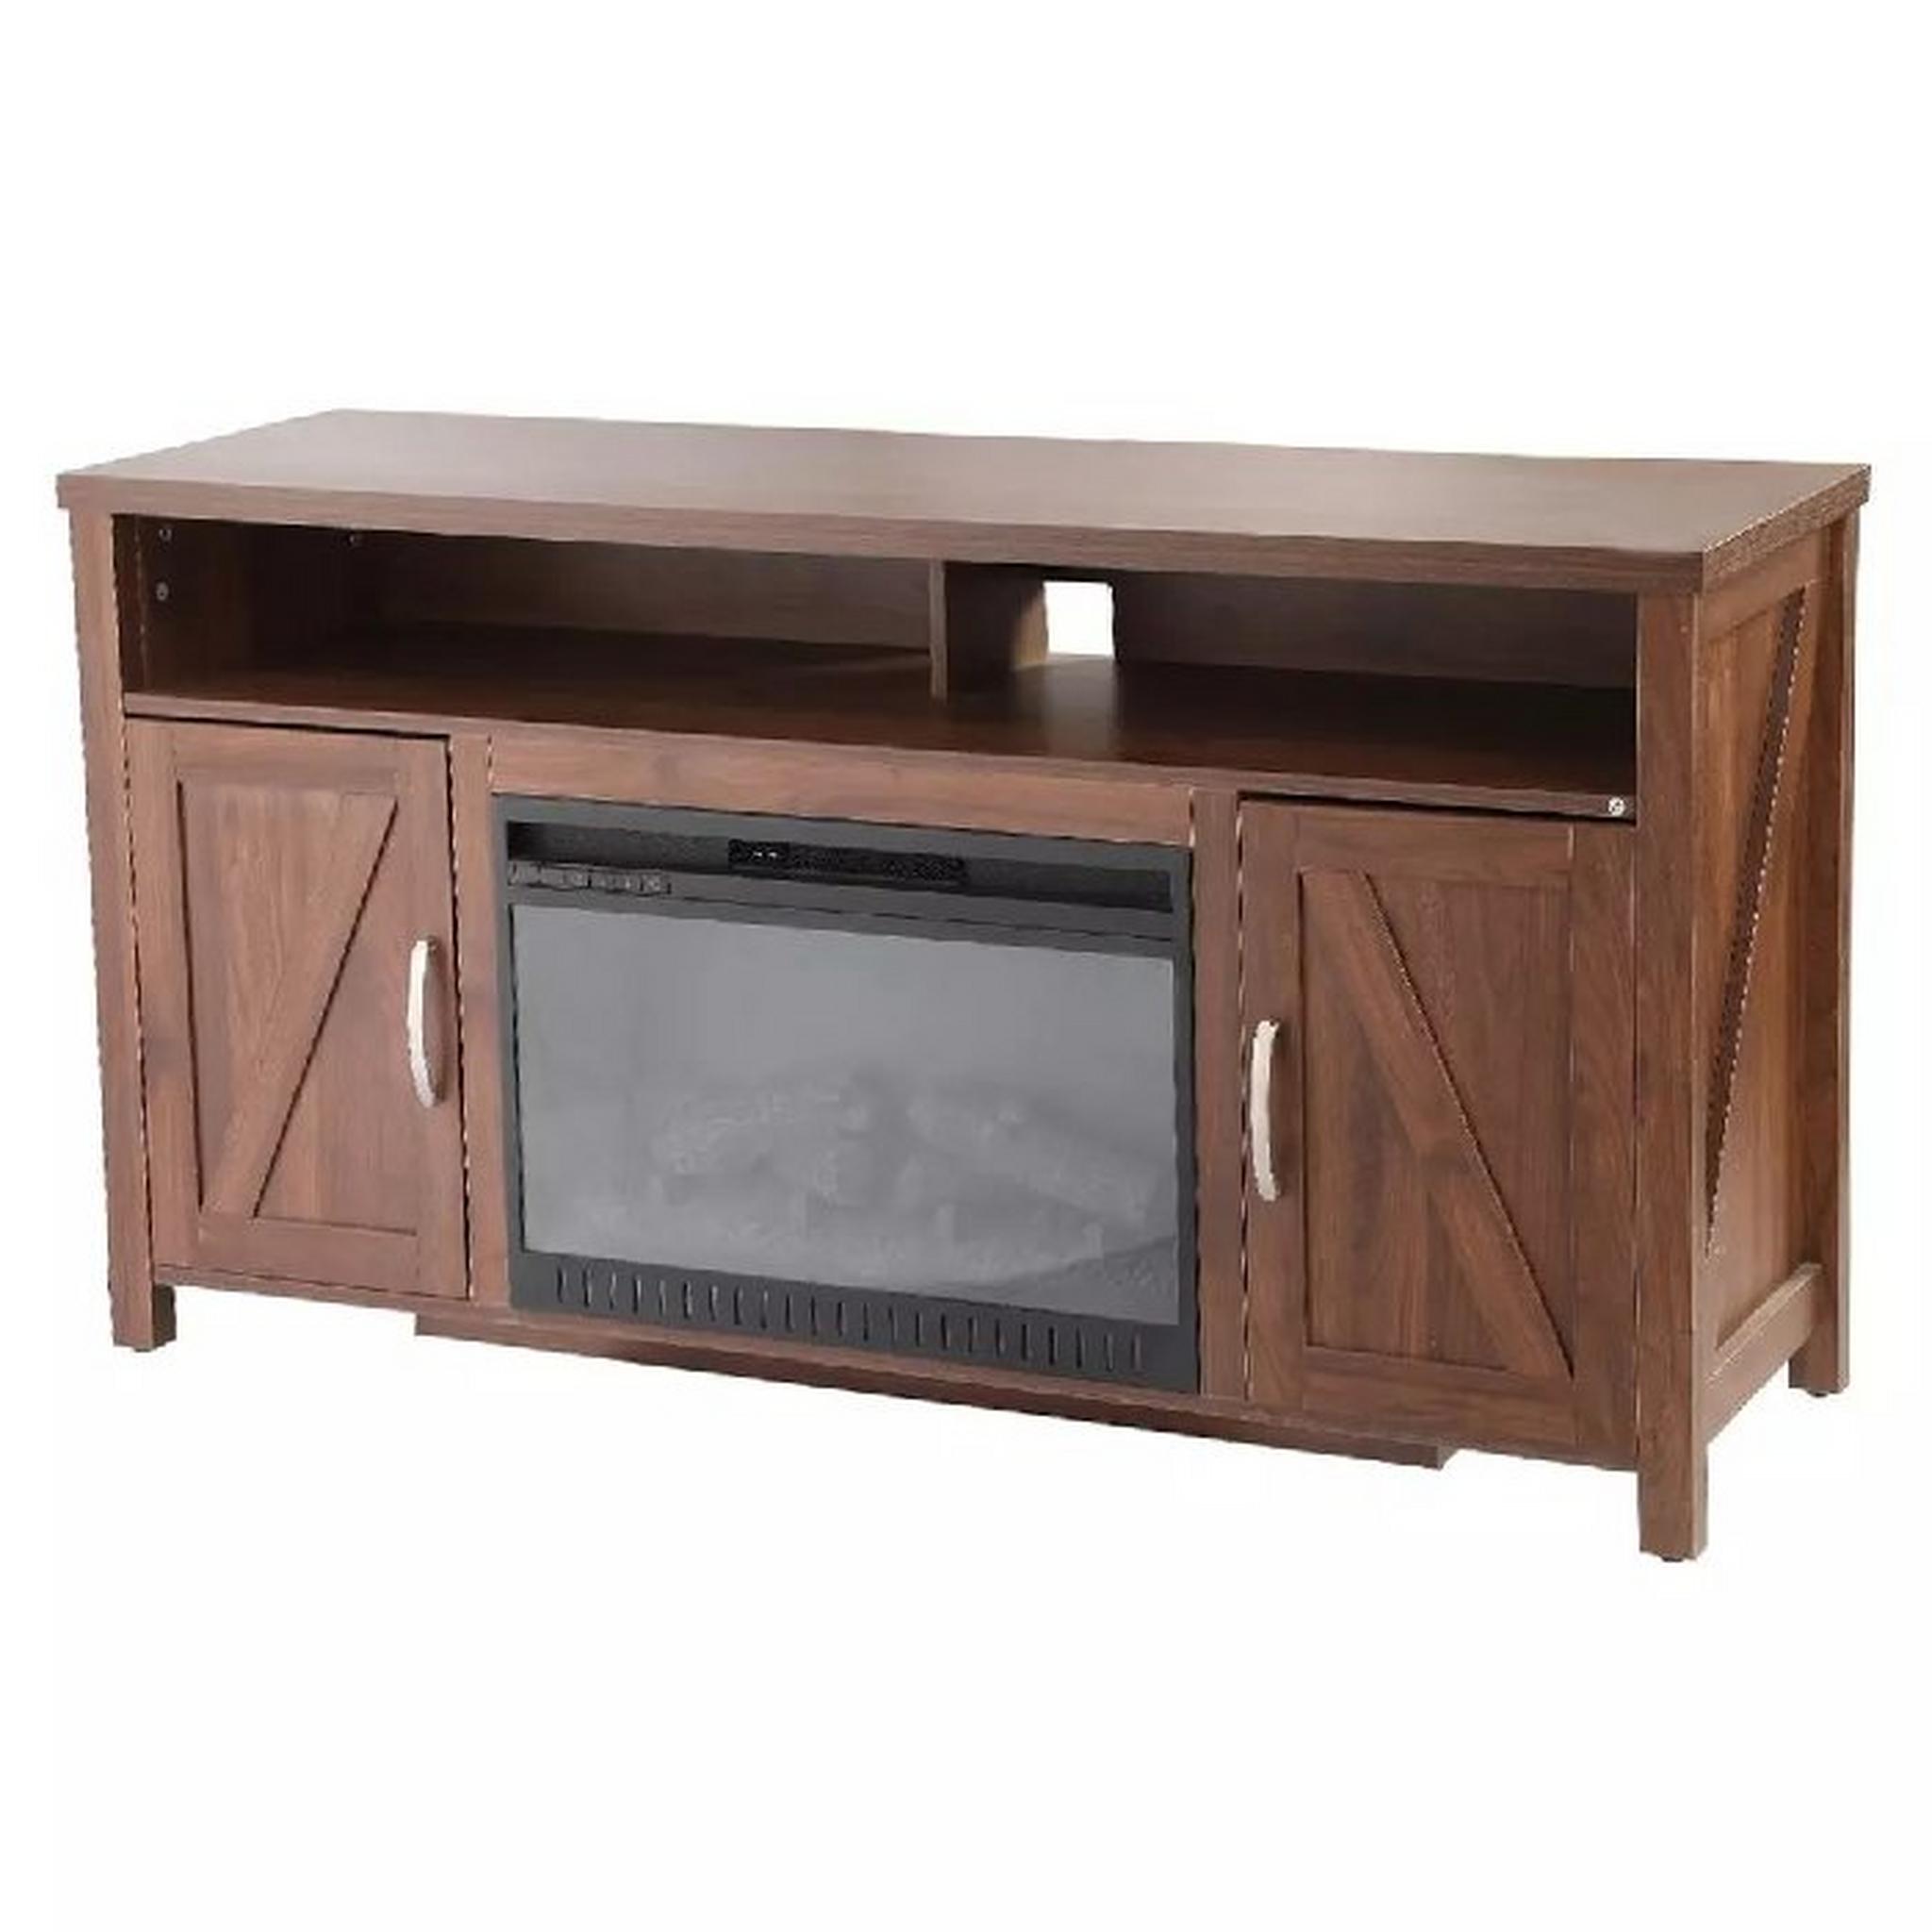 Wansa 65" TV Stand with Electric Fireplace - Walnut Brown (A-001FT) + Fireplace insert for TV Stand (SF122-26A)